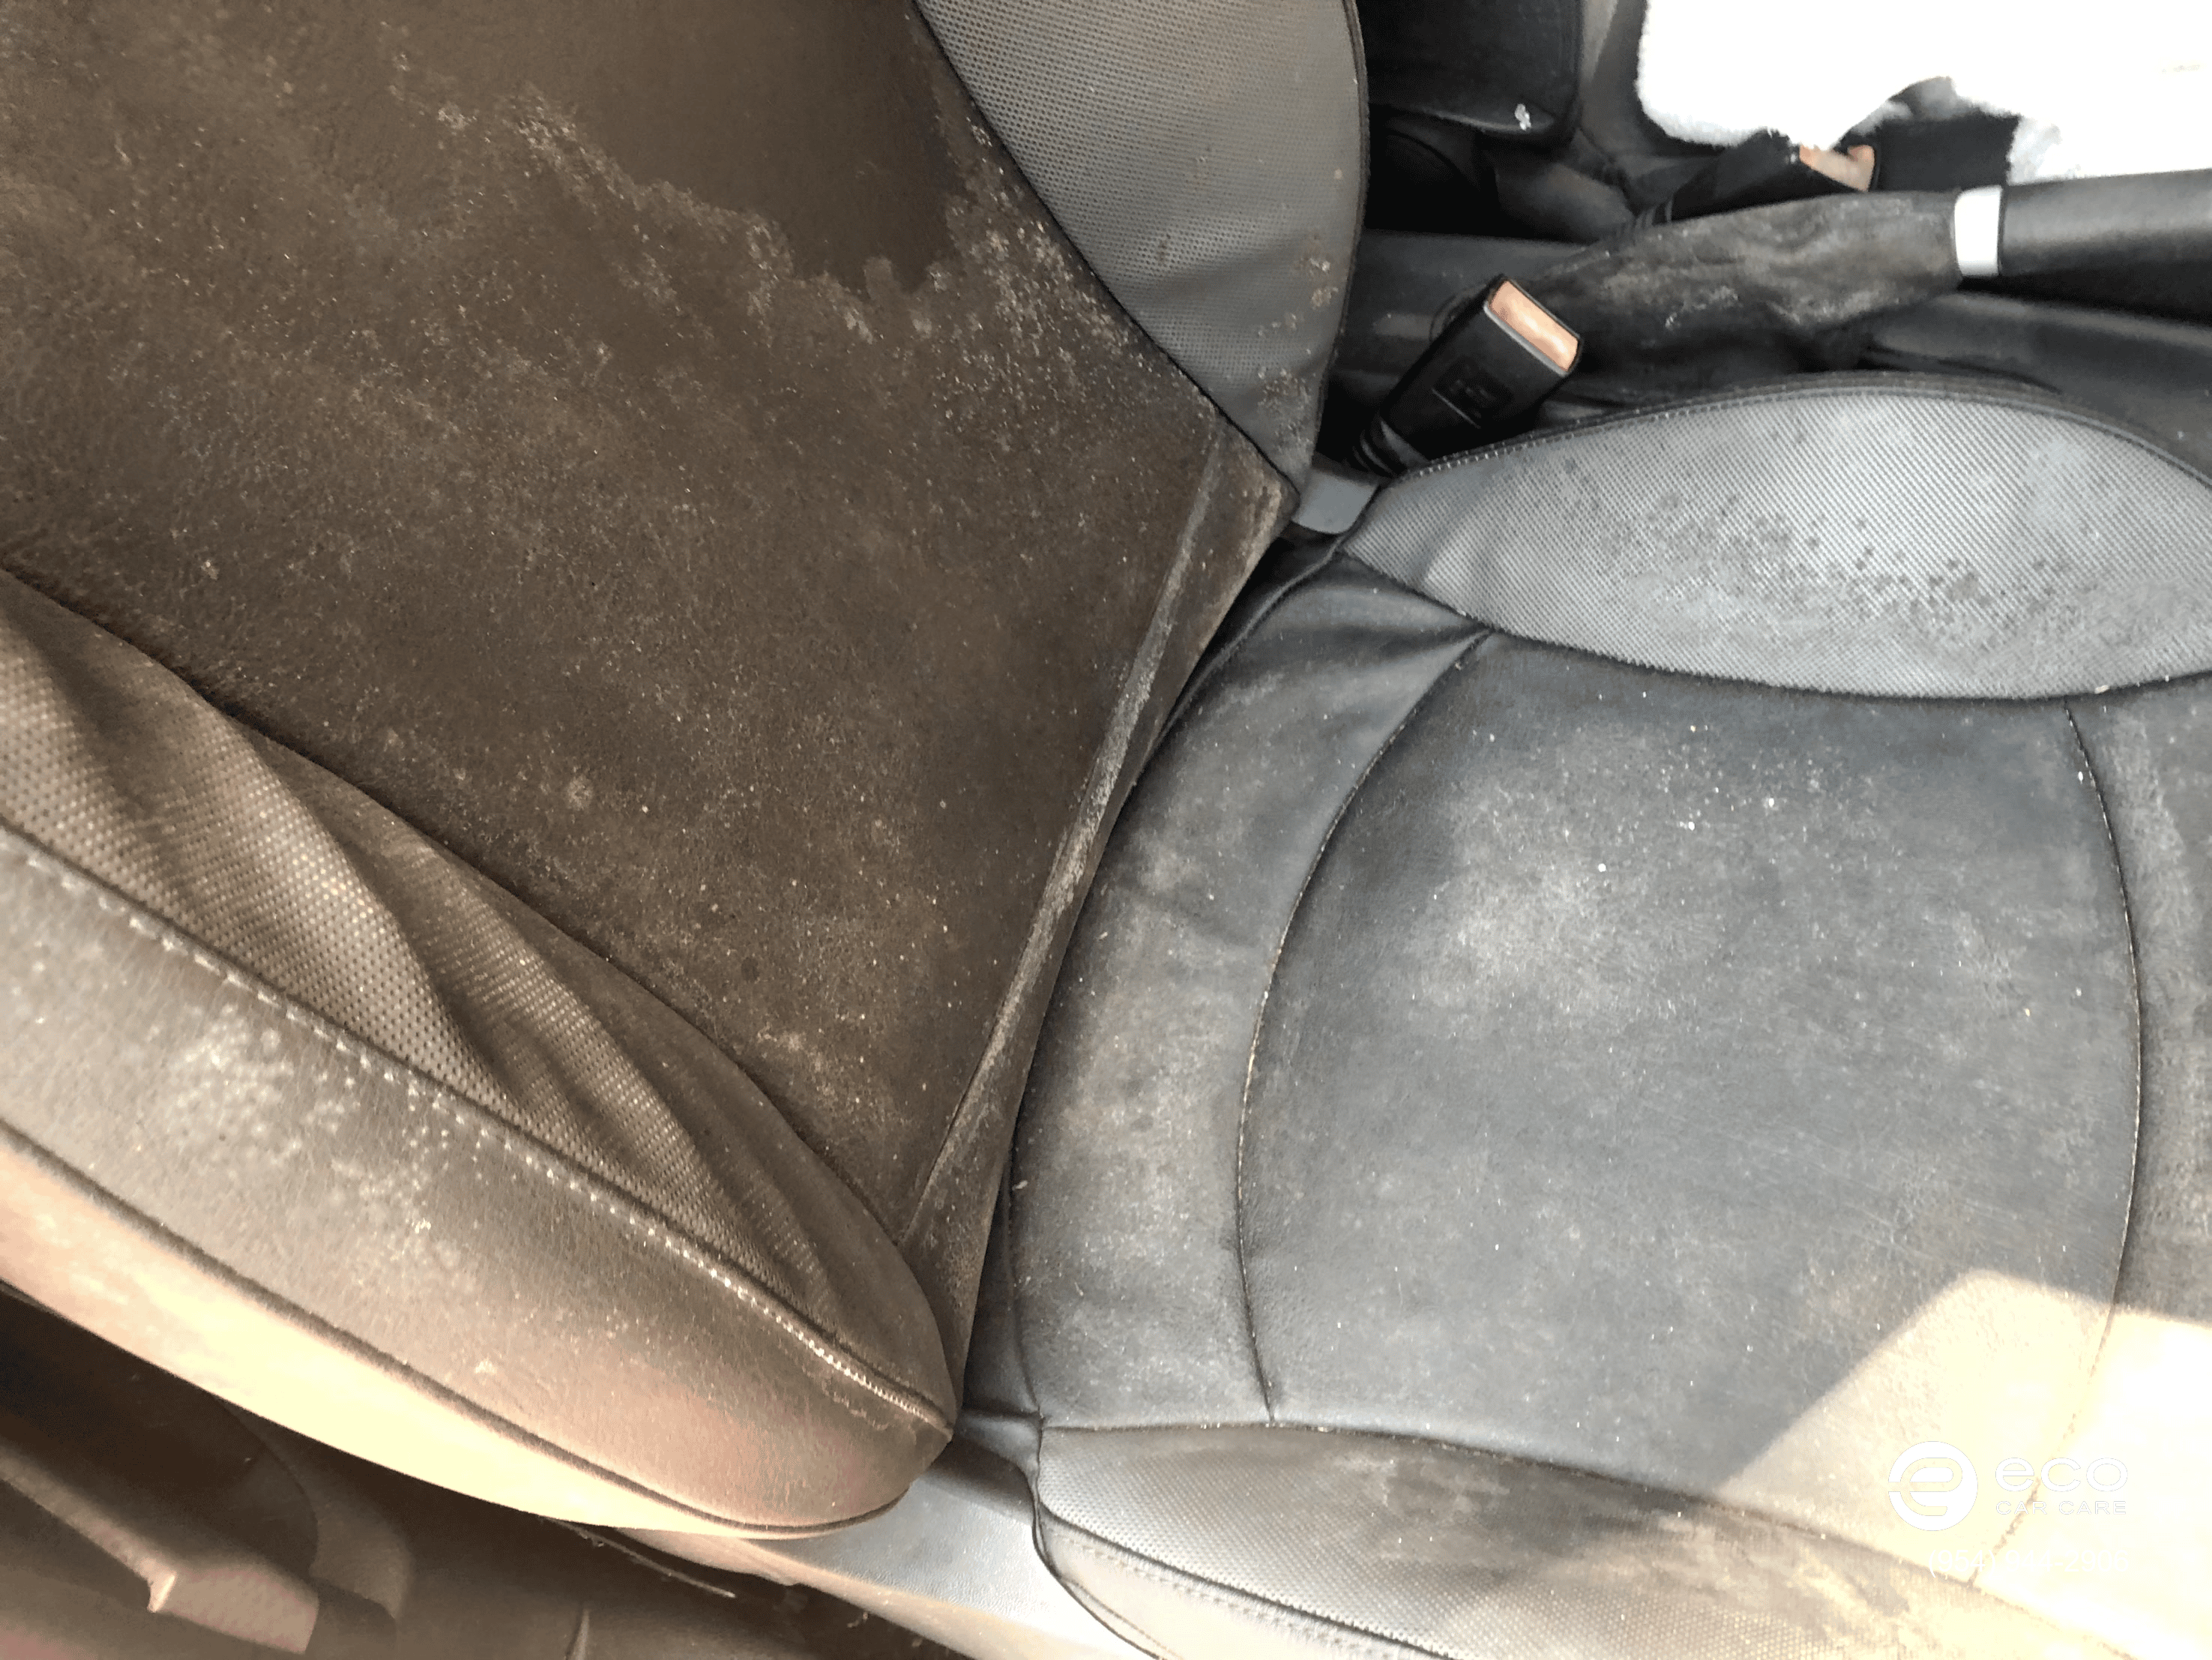 car detailing mold removal near me